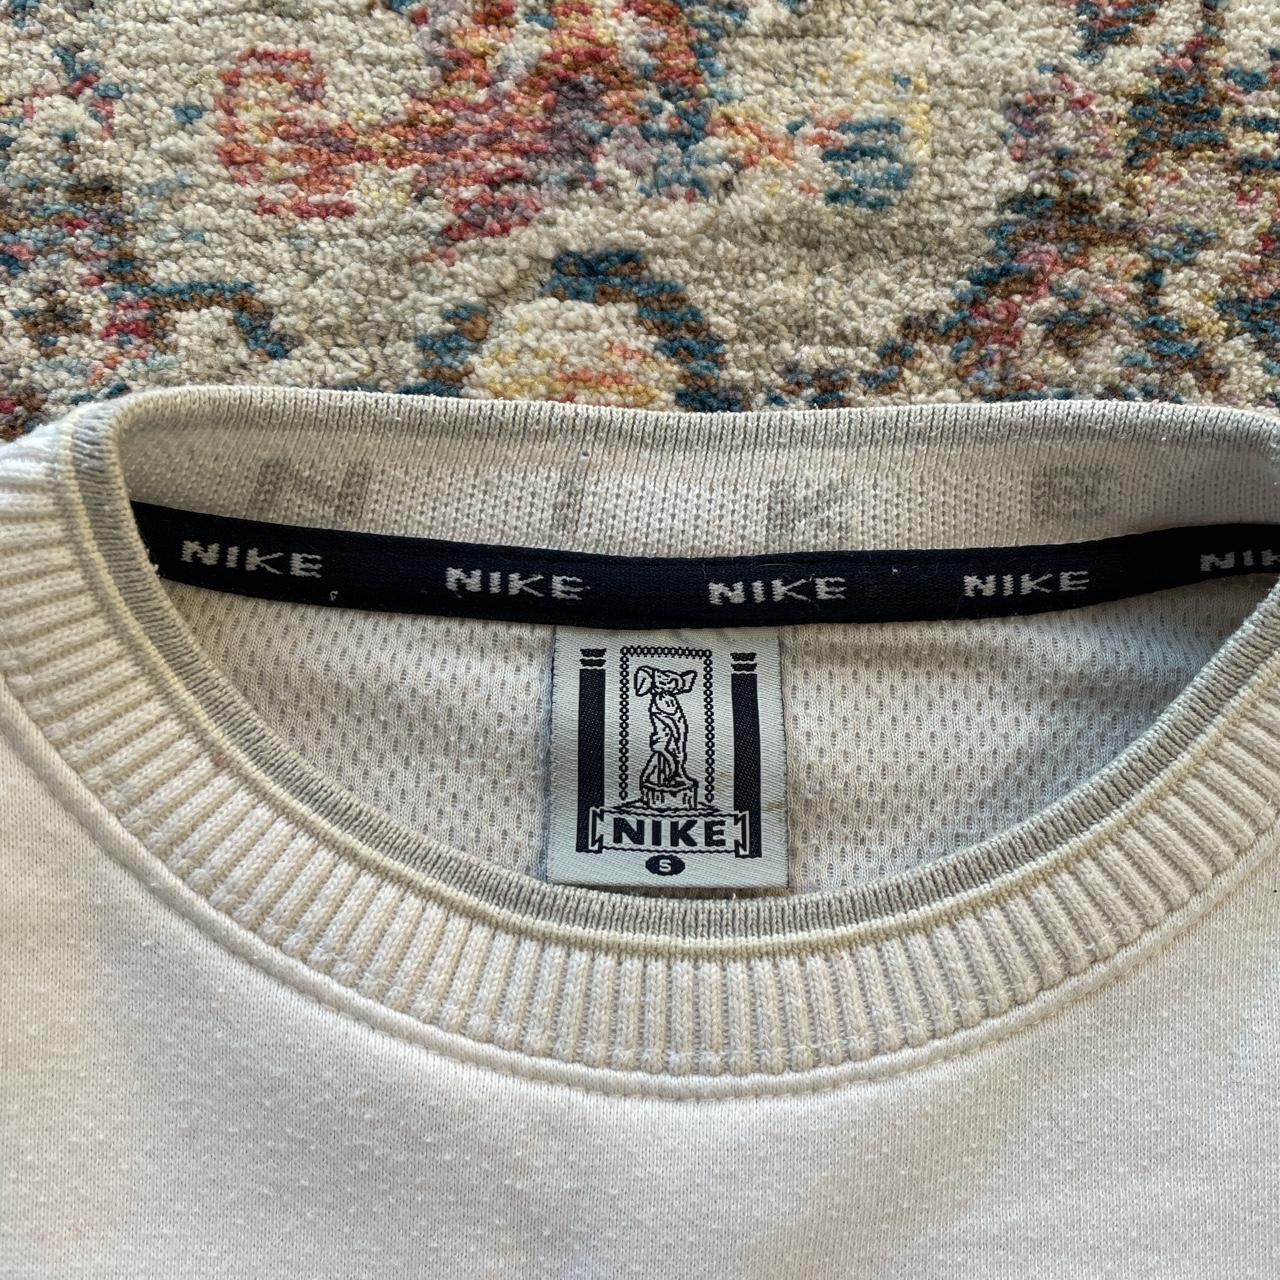 Vintage Nike White Spell Out Sweatshirt